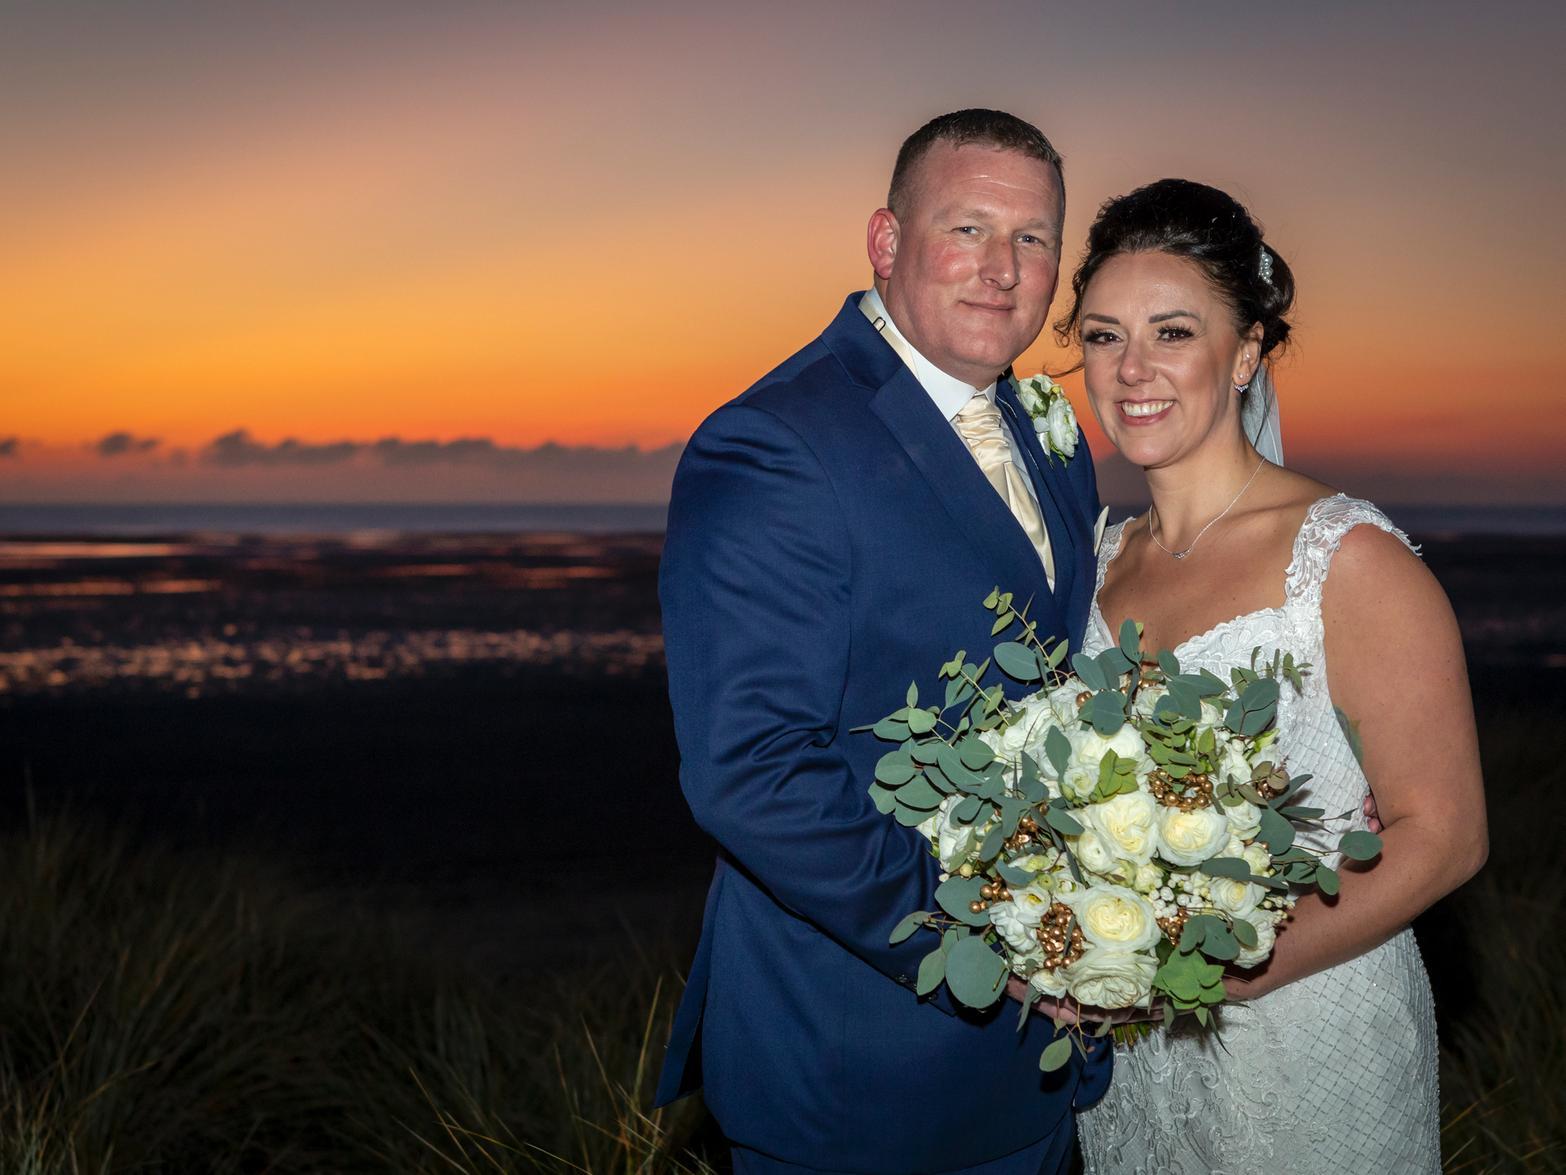 Their whole wedding day was spent at the Glendower Hotel in St Annes and they were very lucky with a day of winter sunshine. Photos: Nick Dagger Photography